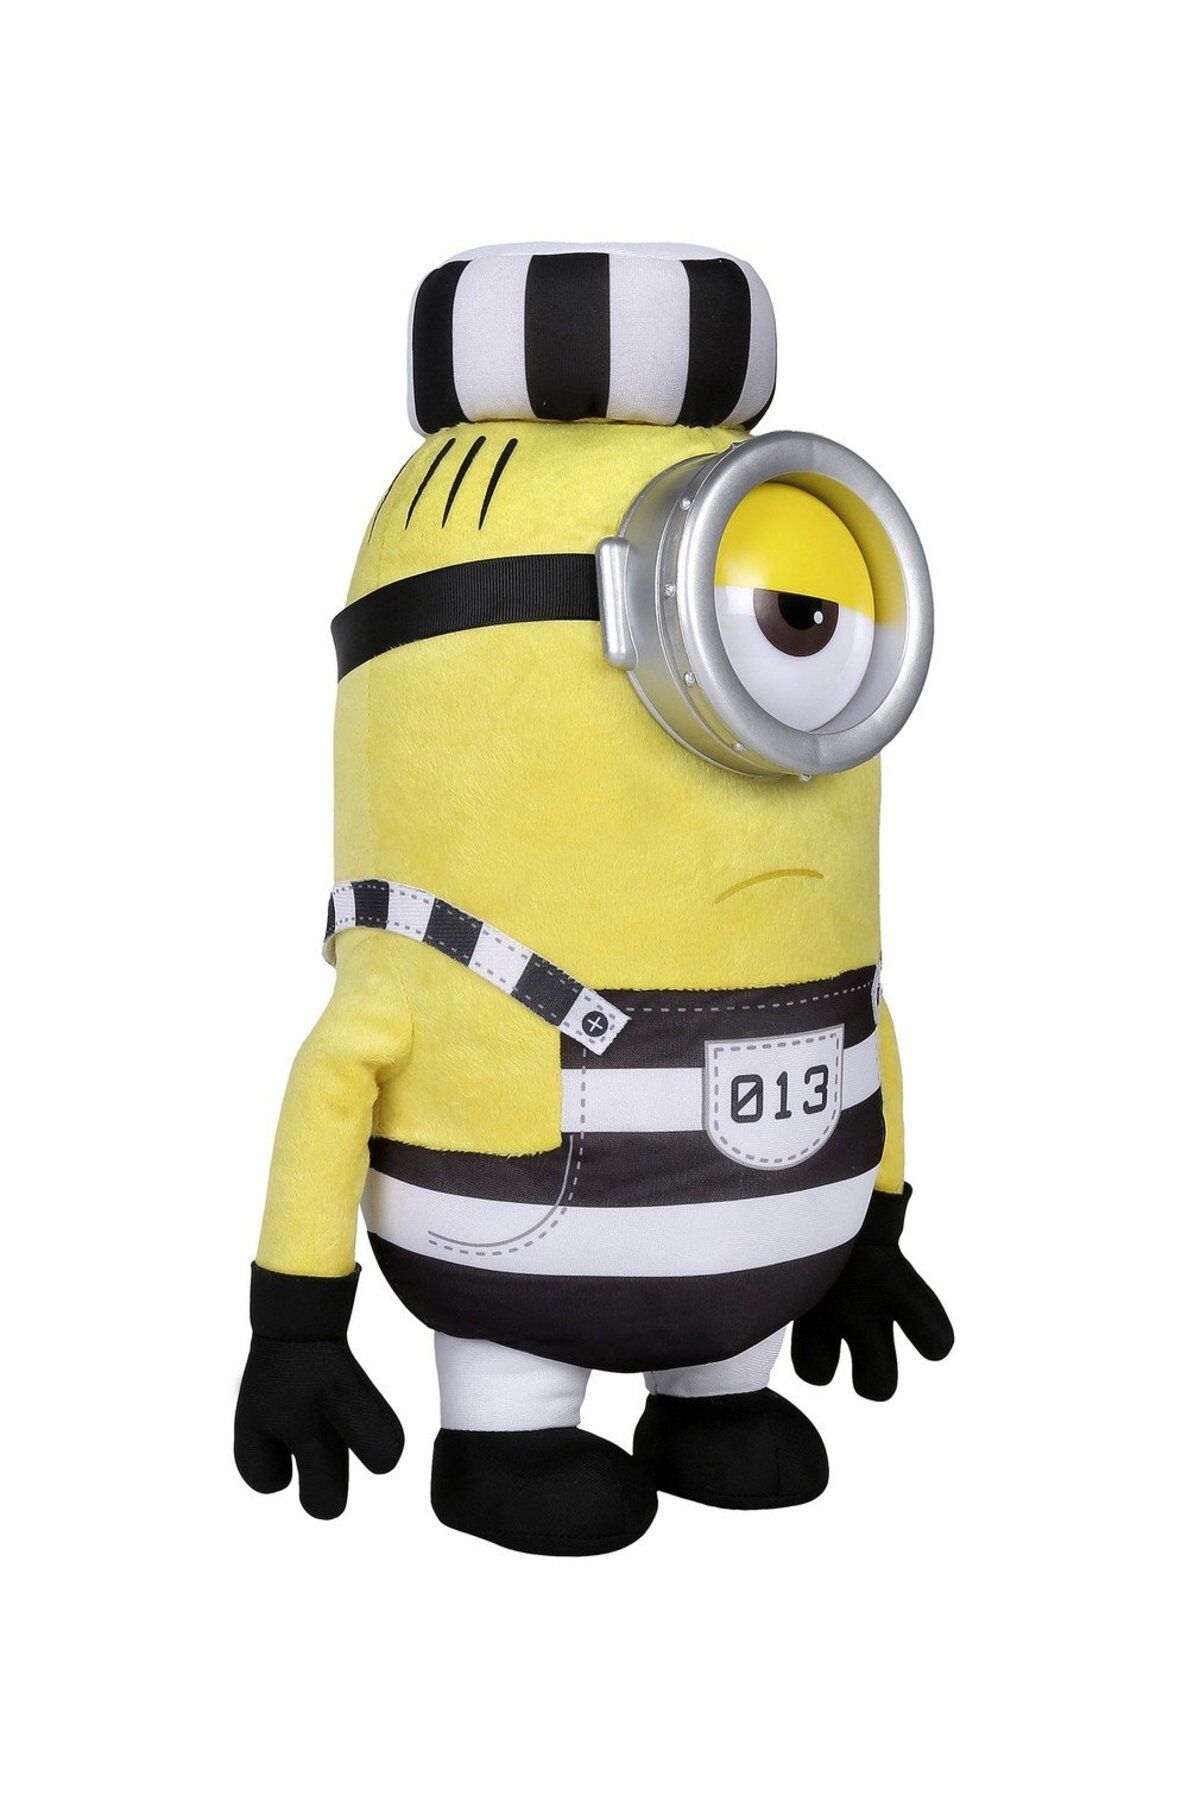 Minions Jail Collecters Edition-2015